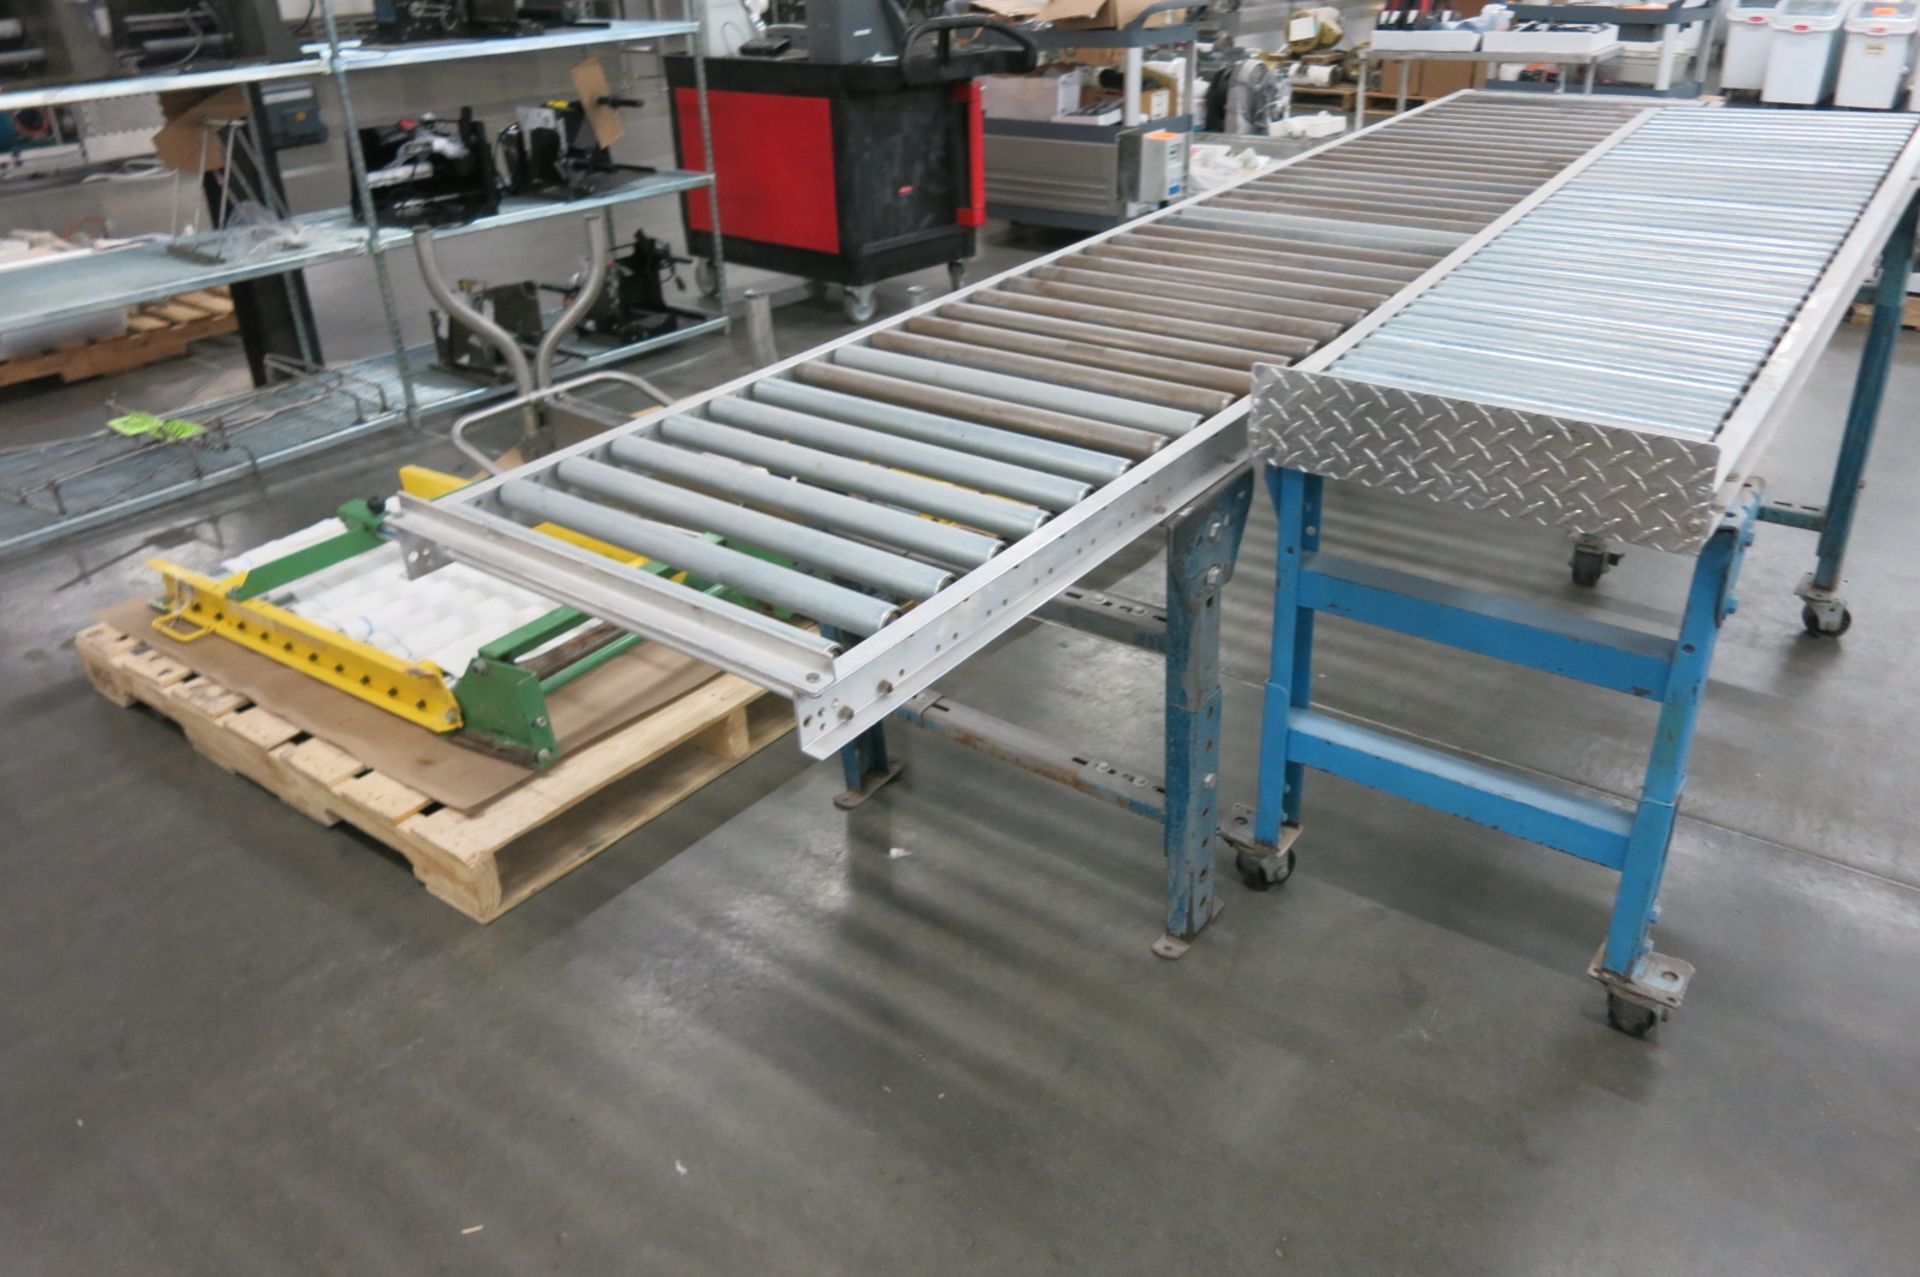 Roller conveyors - Image 2 of 3